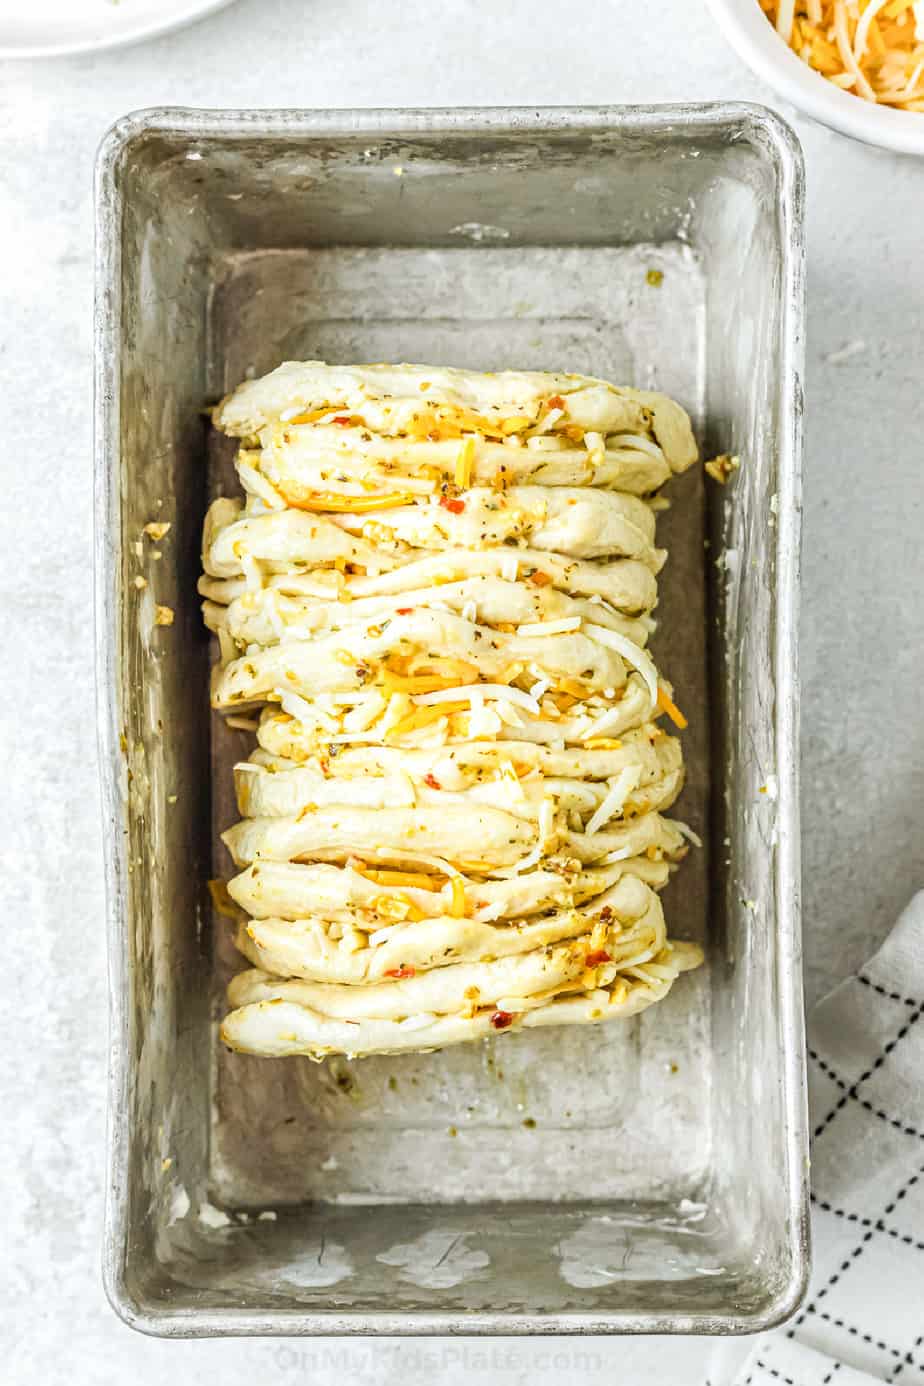 Biscuit dough layered with cheese and herbs stacked in a bread pan from overhead